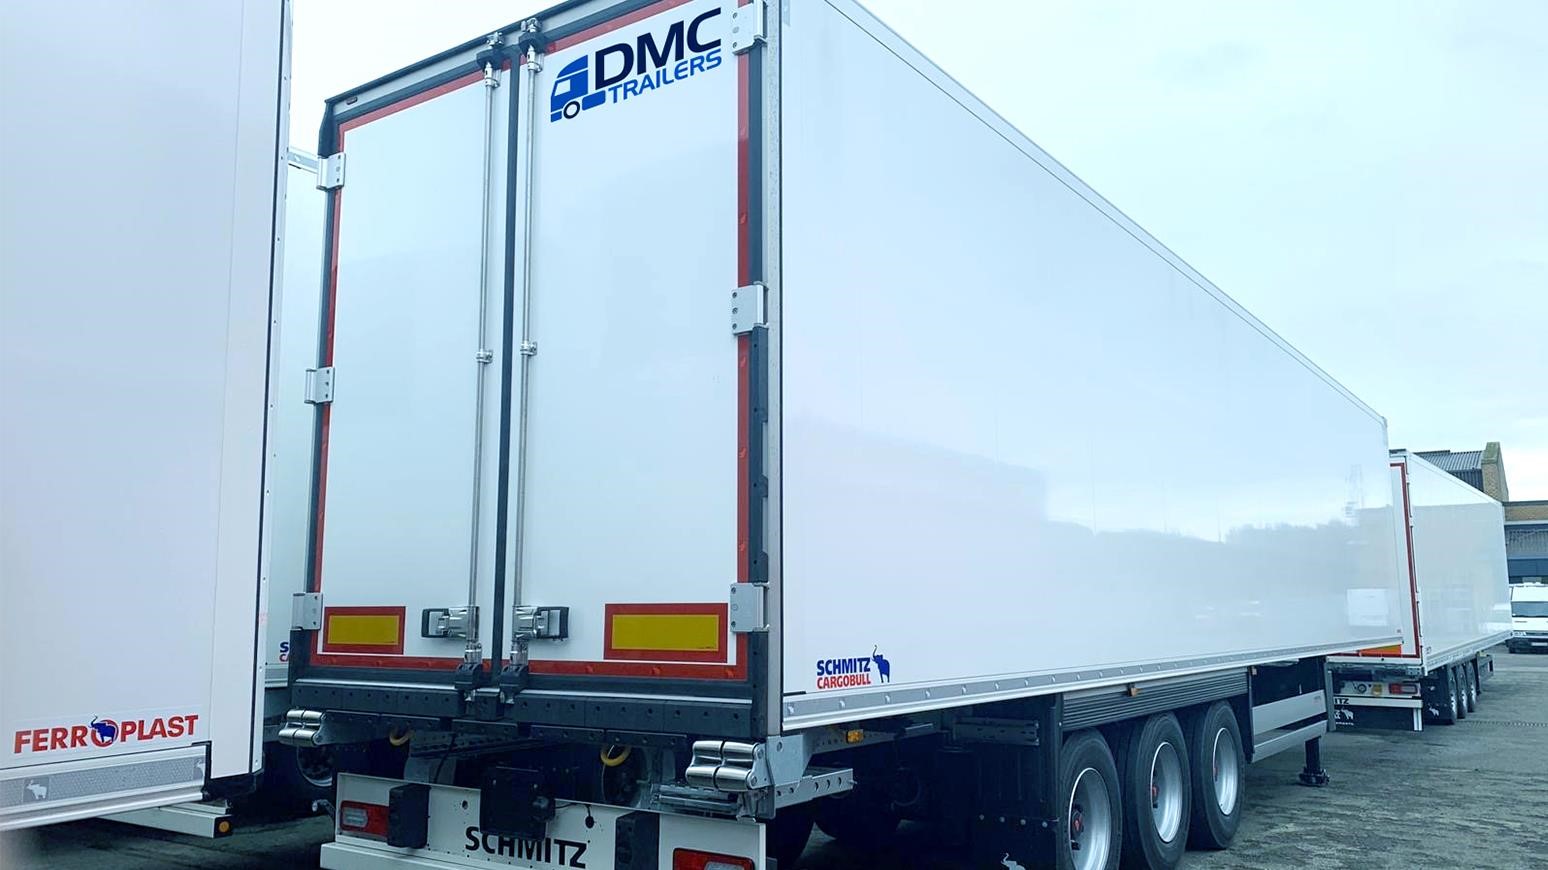 Scunthorpe-Based DMC Trailers Adds 20 New Schmitz Cargobull Trailers With Carrier Transicold Refrigeration Units